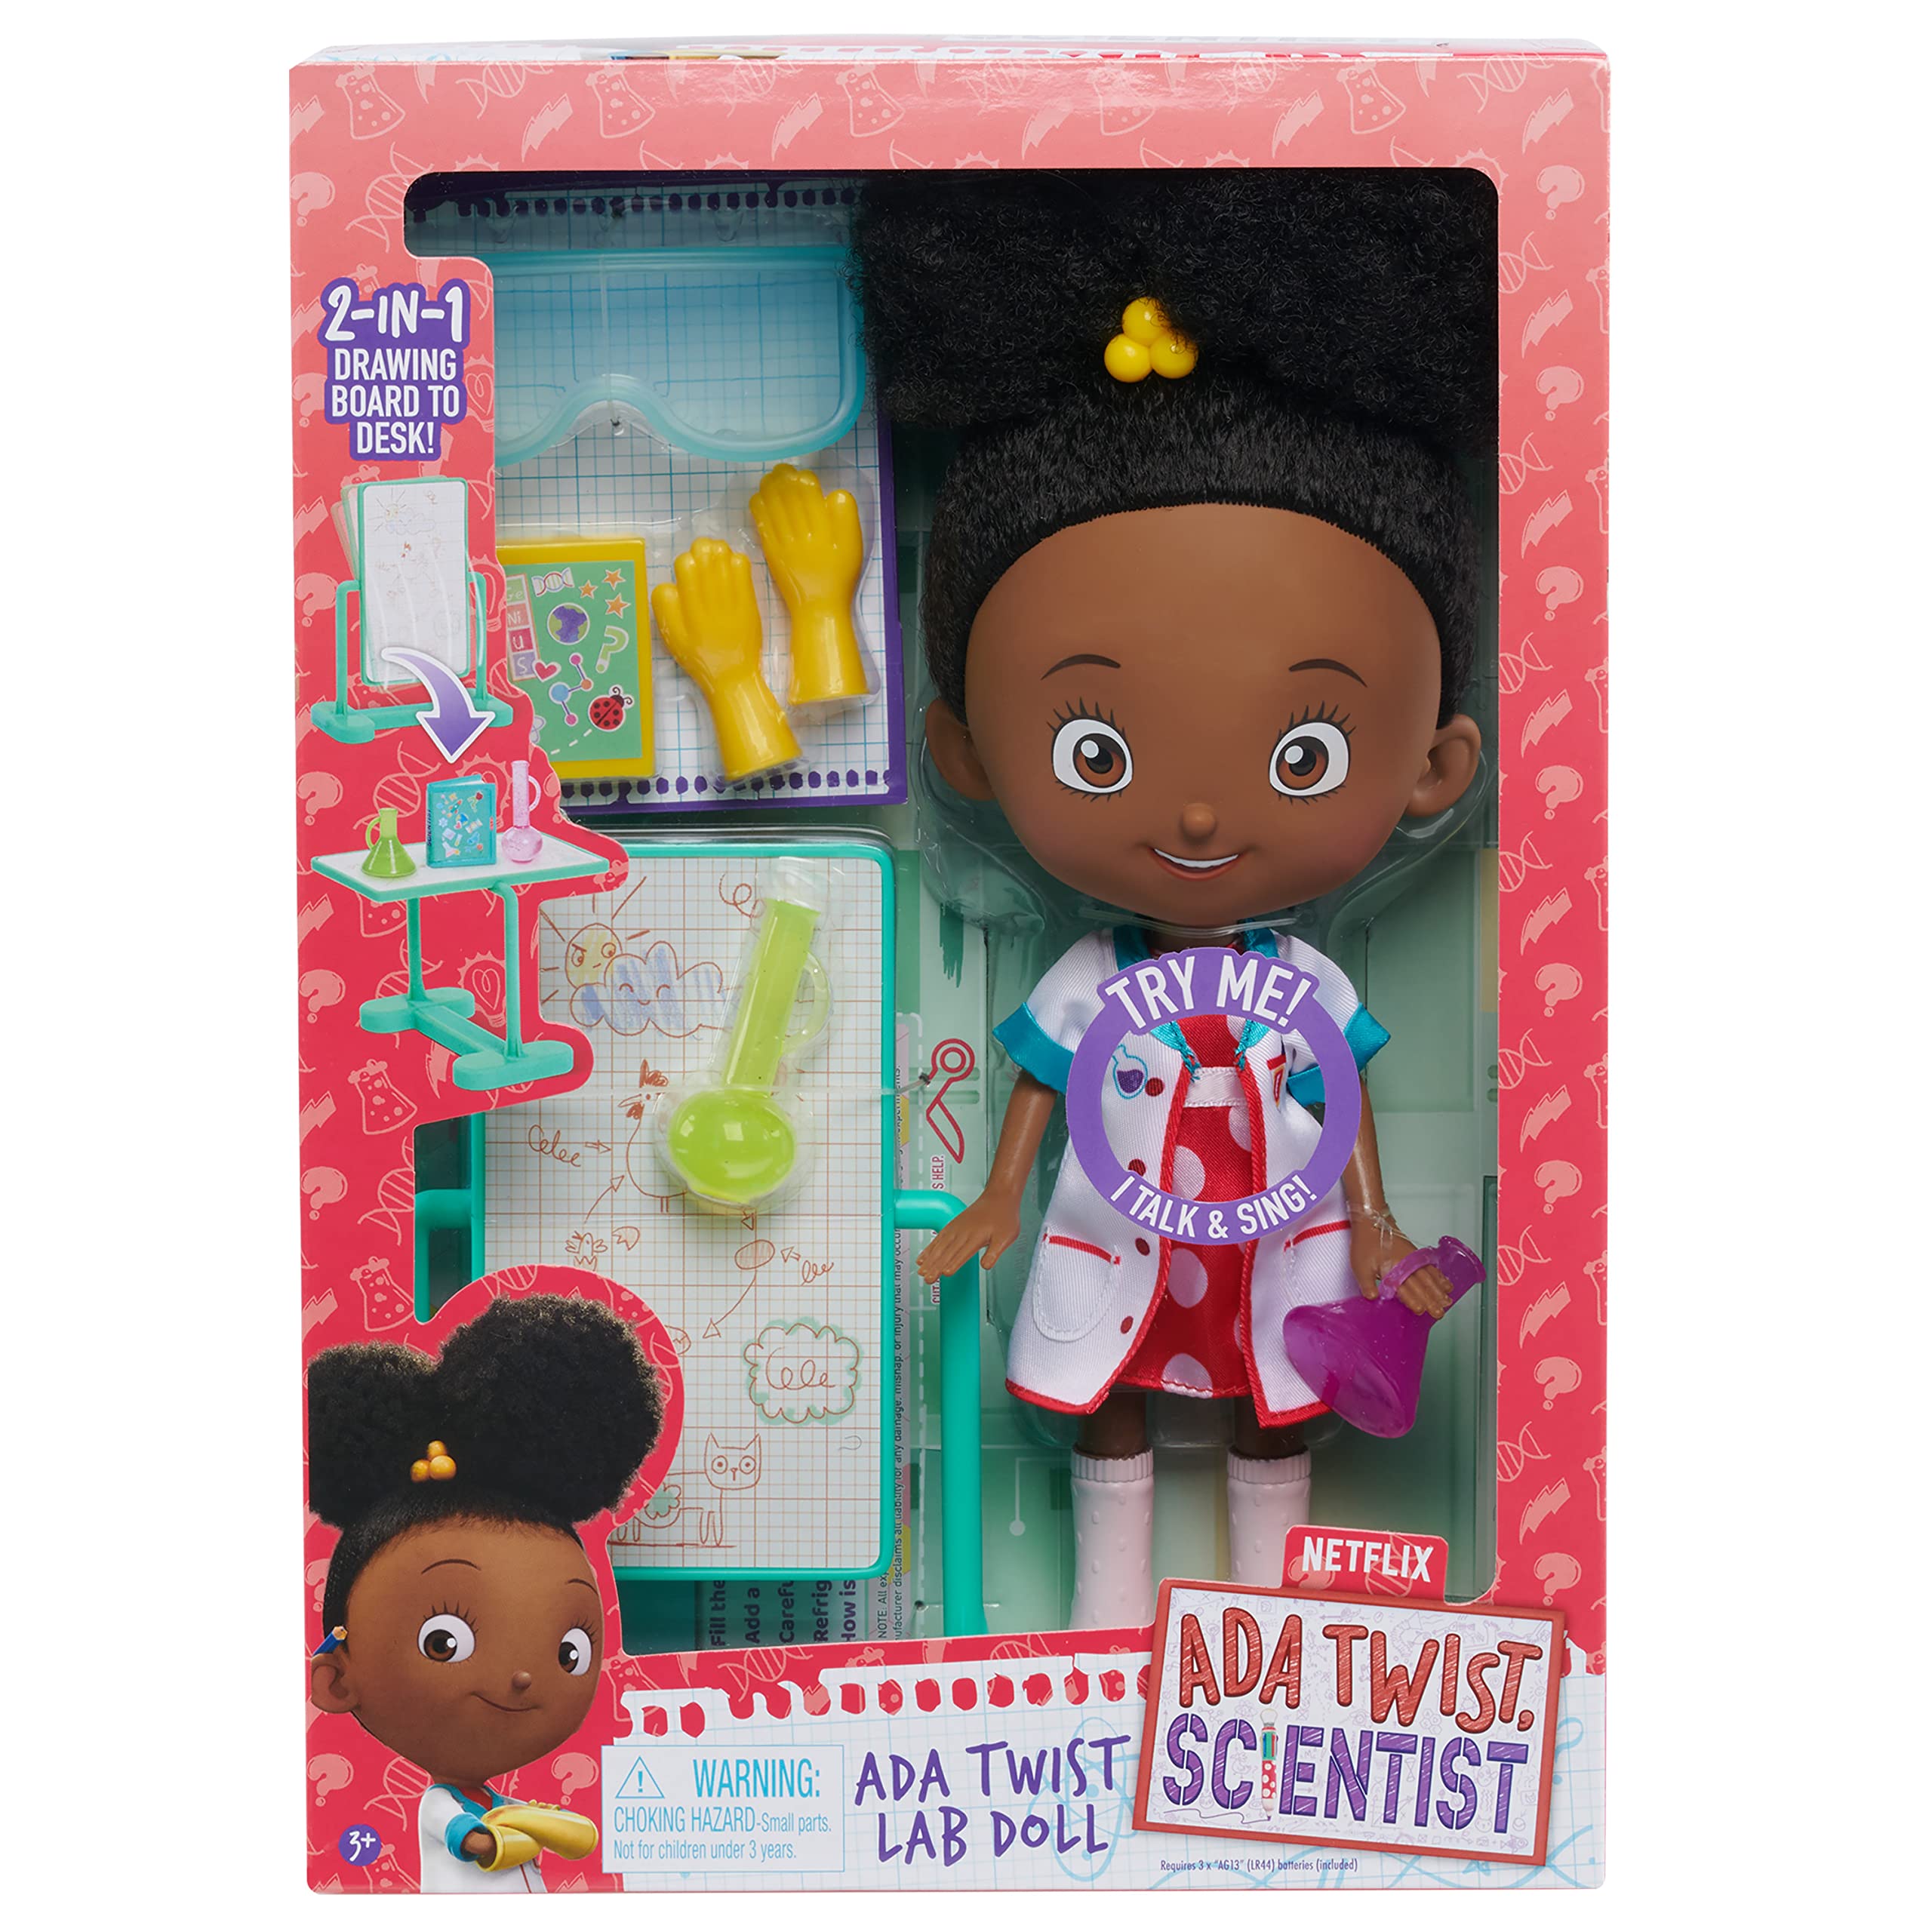 ADA TWIST, Scientist Lab Doll, 12.5 Inch Interactive Doll with Research Lab Accessories, Talks and Sings The The Brainstorm Song, Kids Toys for Ages 3 Up, Gifts and Presents by Just Play